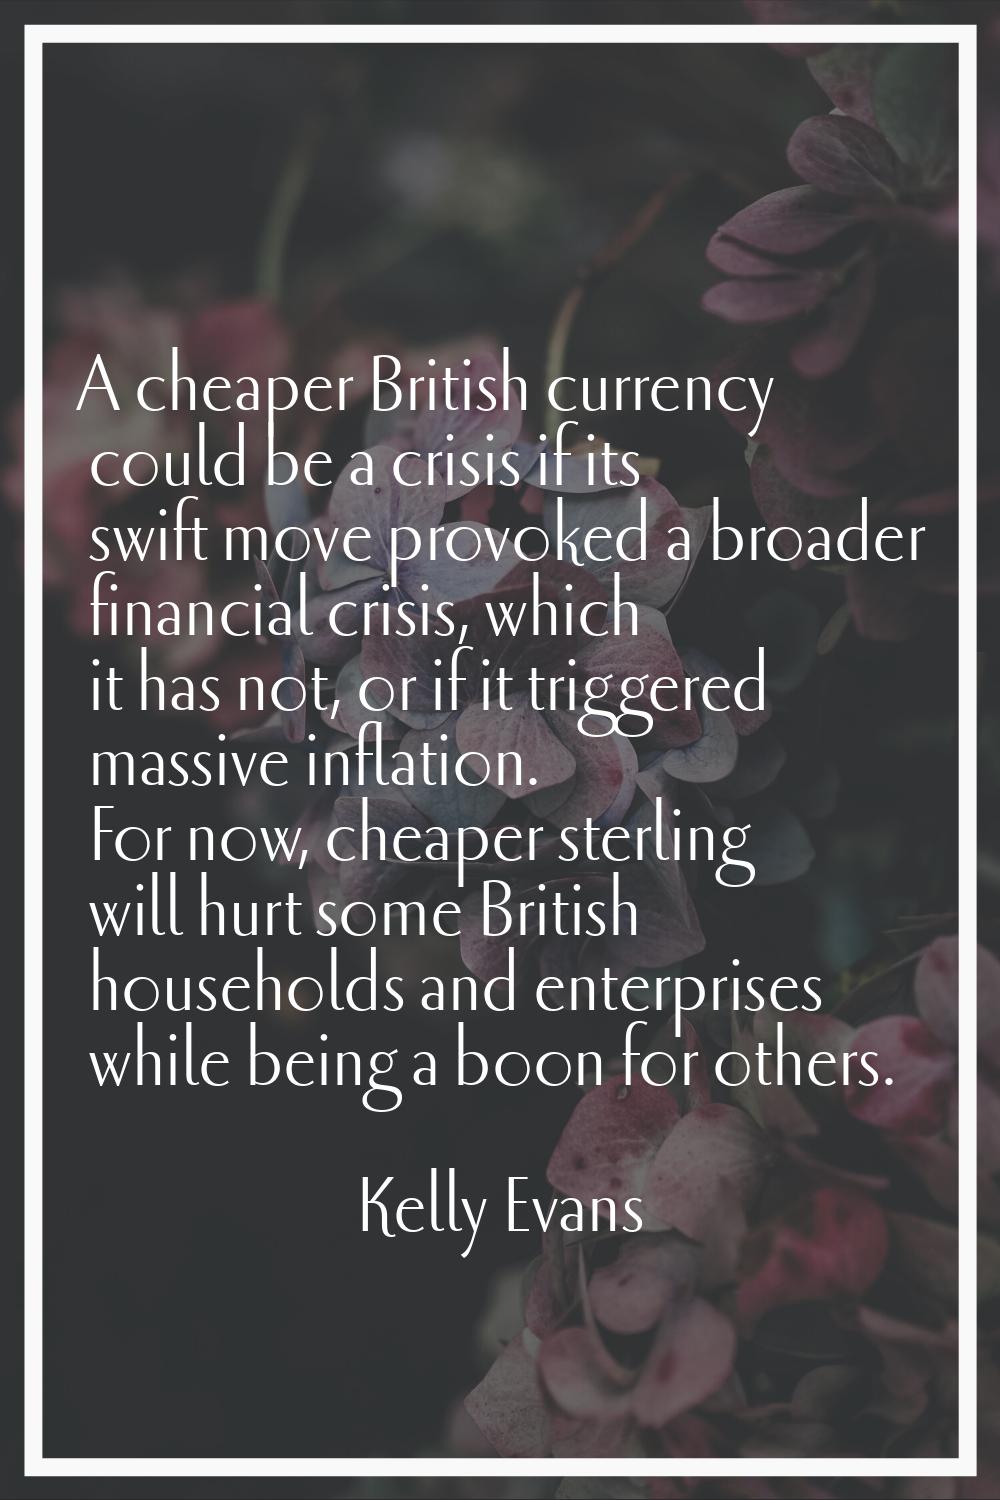 A cheaper British currency could be a crisis if its swift move provoked a broader financial crisis,